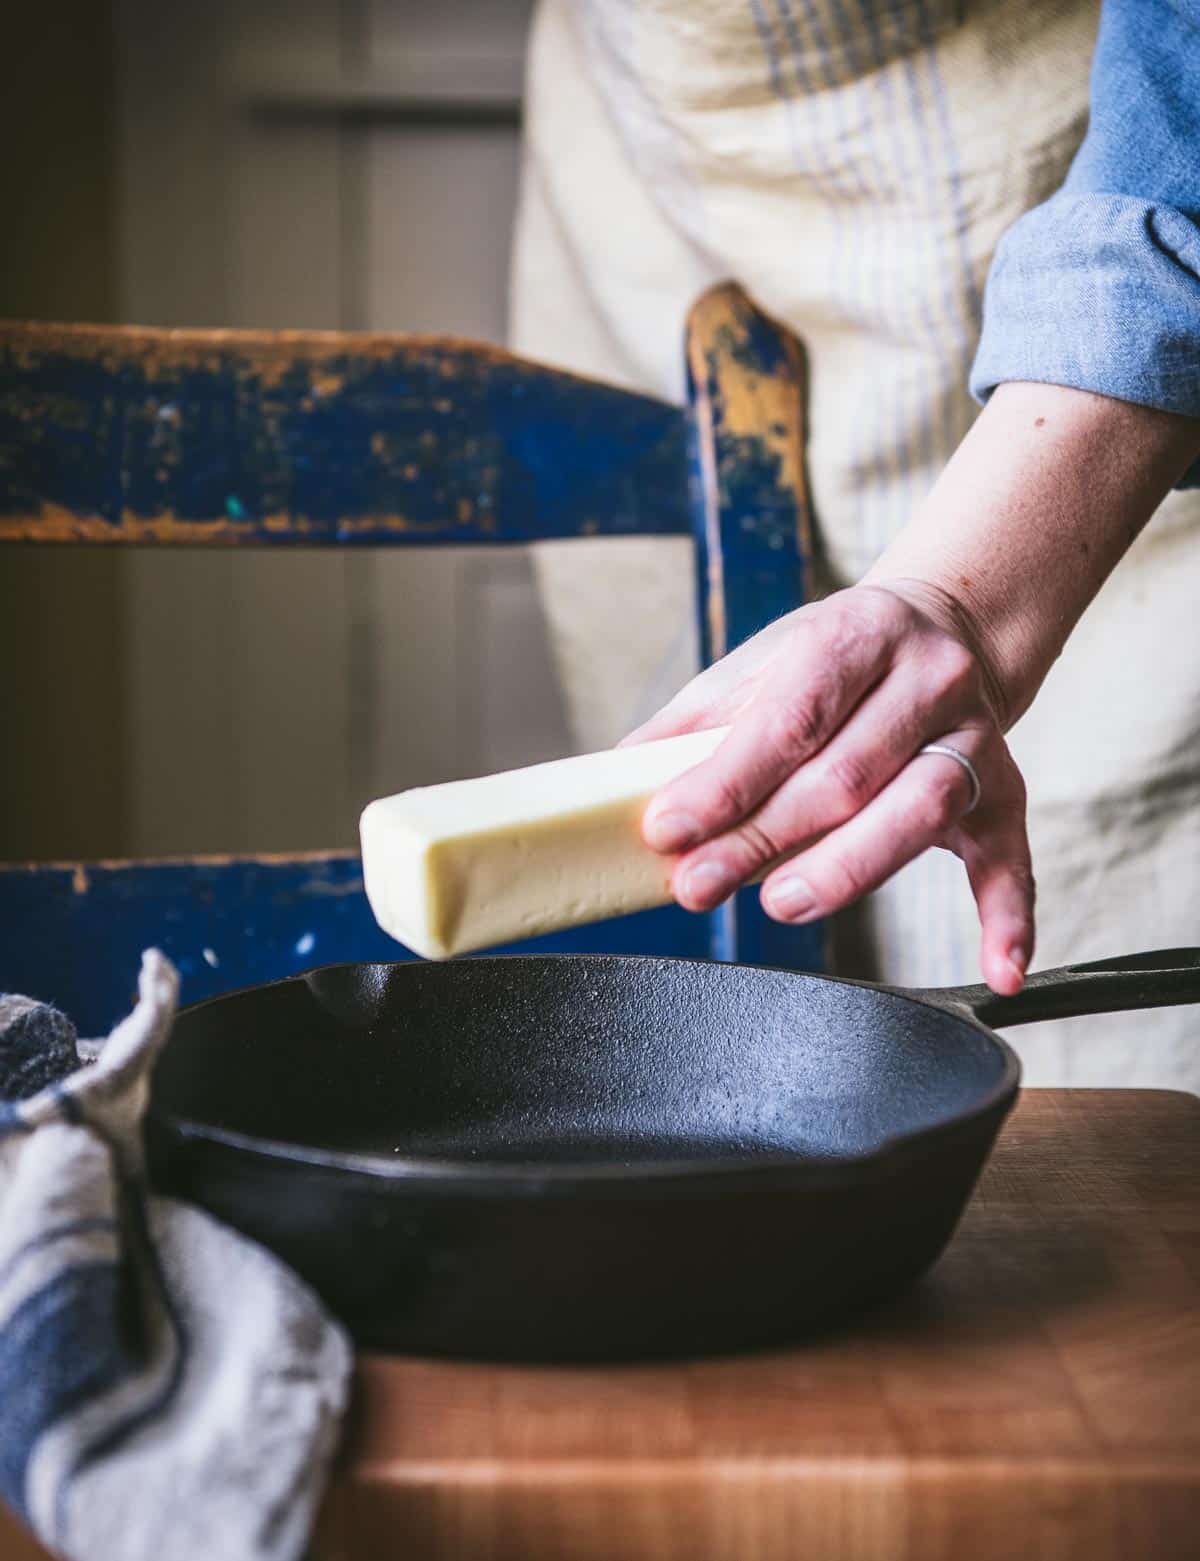 Placing a stick of butter in a cast iron skillet.